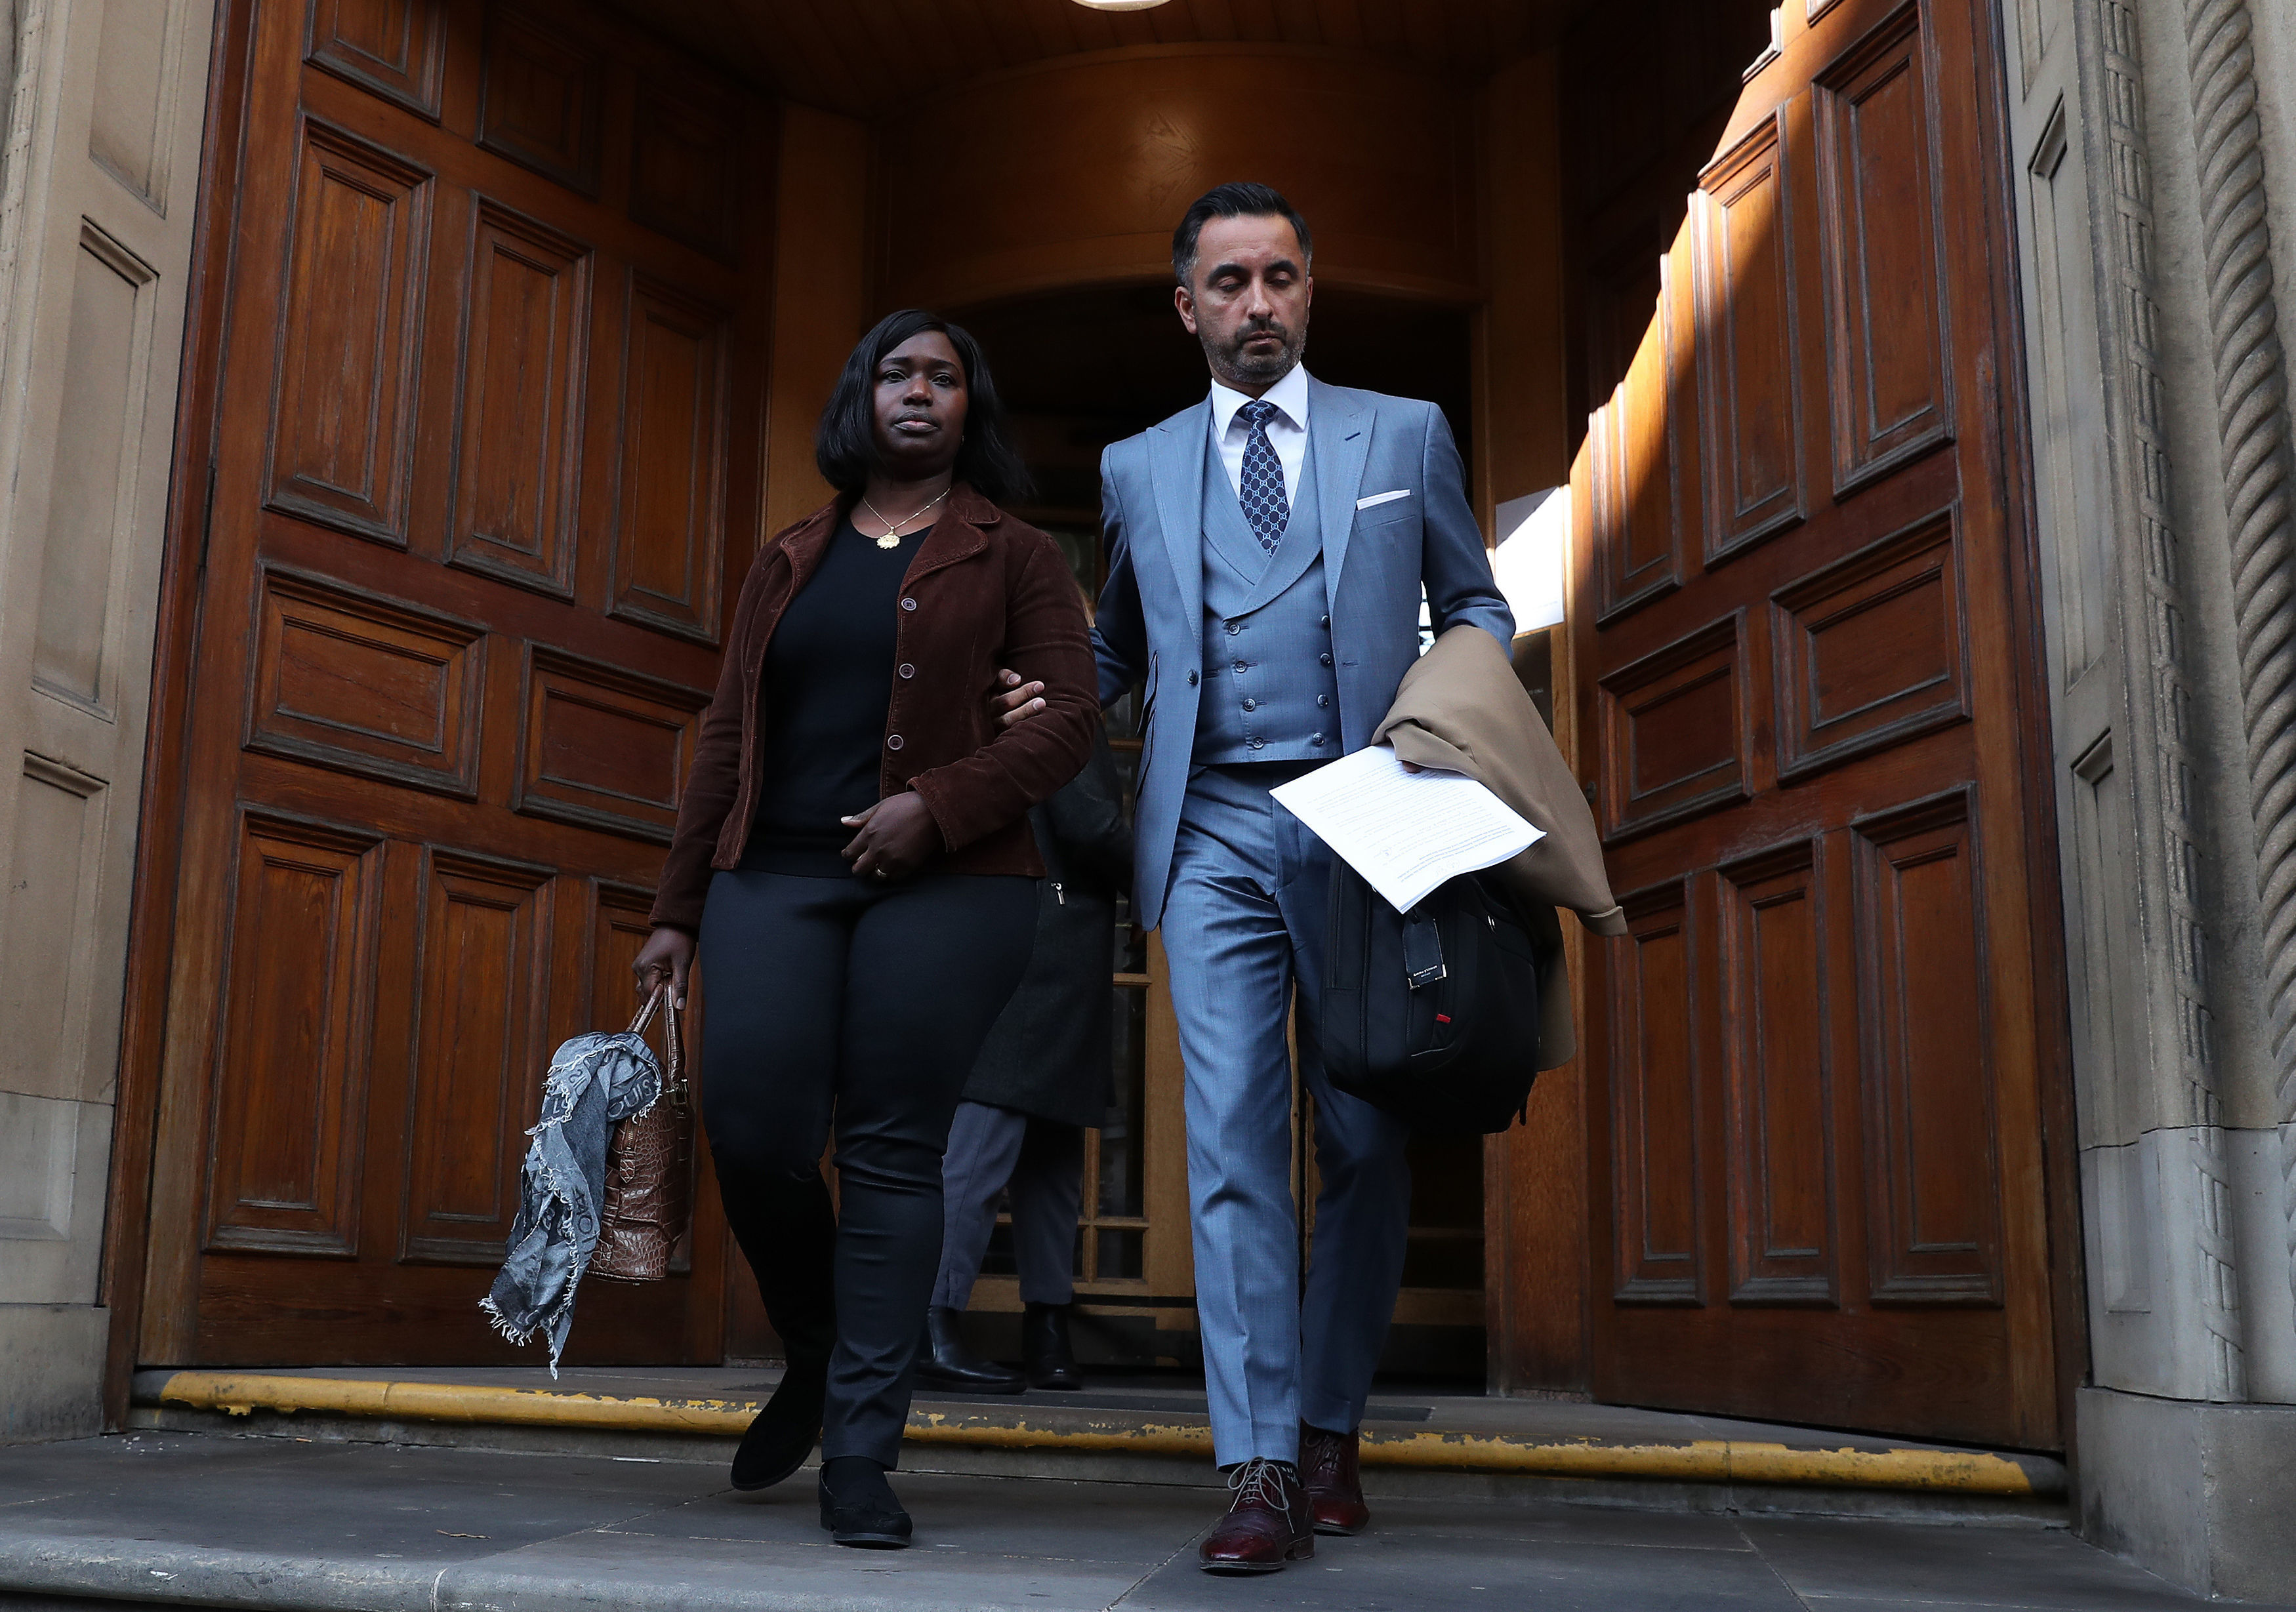 Kadijatu Johnson sister of Sheku Bayoh with lawyer Aamer Anwar as they arrive to speak to the media outside the Crown Office in Edinburgh. The family earlier met with Lord Advocate James Wolffe QC to hear his decision over prosecutions for the death of Mr Bayoh in police custody in 2015.